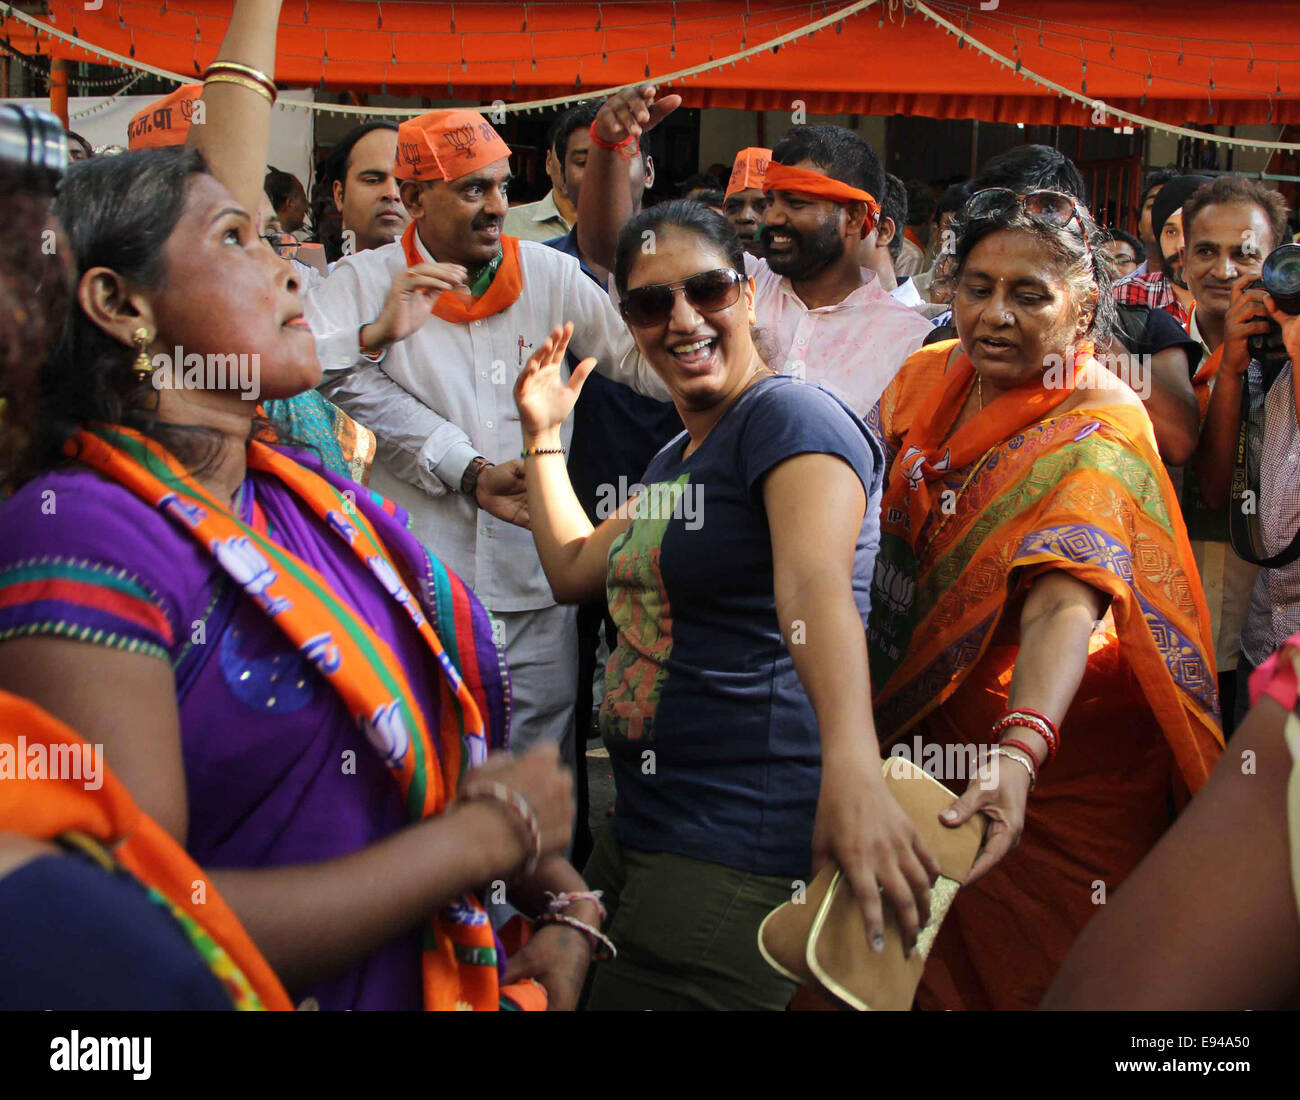 Mumbai, India. 19th Oct, 2014. Supporters of India's ruling Bharatiya Janata Party (BJP) celebrate as early results indicated the party leading in the Maharashtra state assembly elections in Mumbai, India, Oct. 19, 2014. India's ruling Bharatiya Janata Party (BJP) has won control of the country's financial capital Mumbai through a legislative election in the state of Maharashtra, while also grasping the northern state of Haryana from the Congress, said vote counting results Sunday. Credit:  Stringer/Xinhua/Alamy Live News Stock Photo